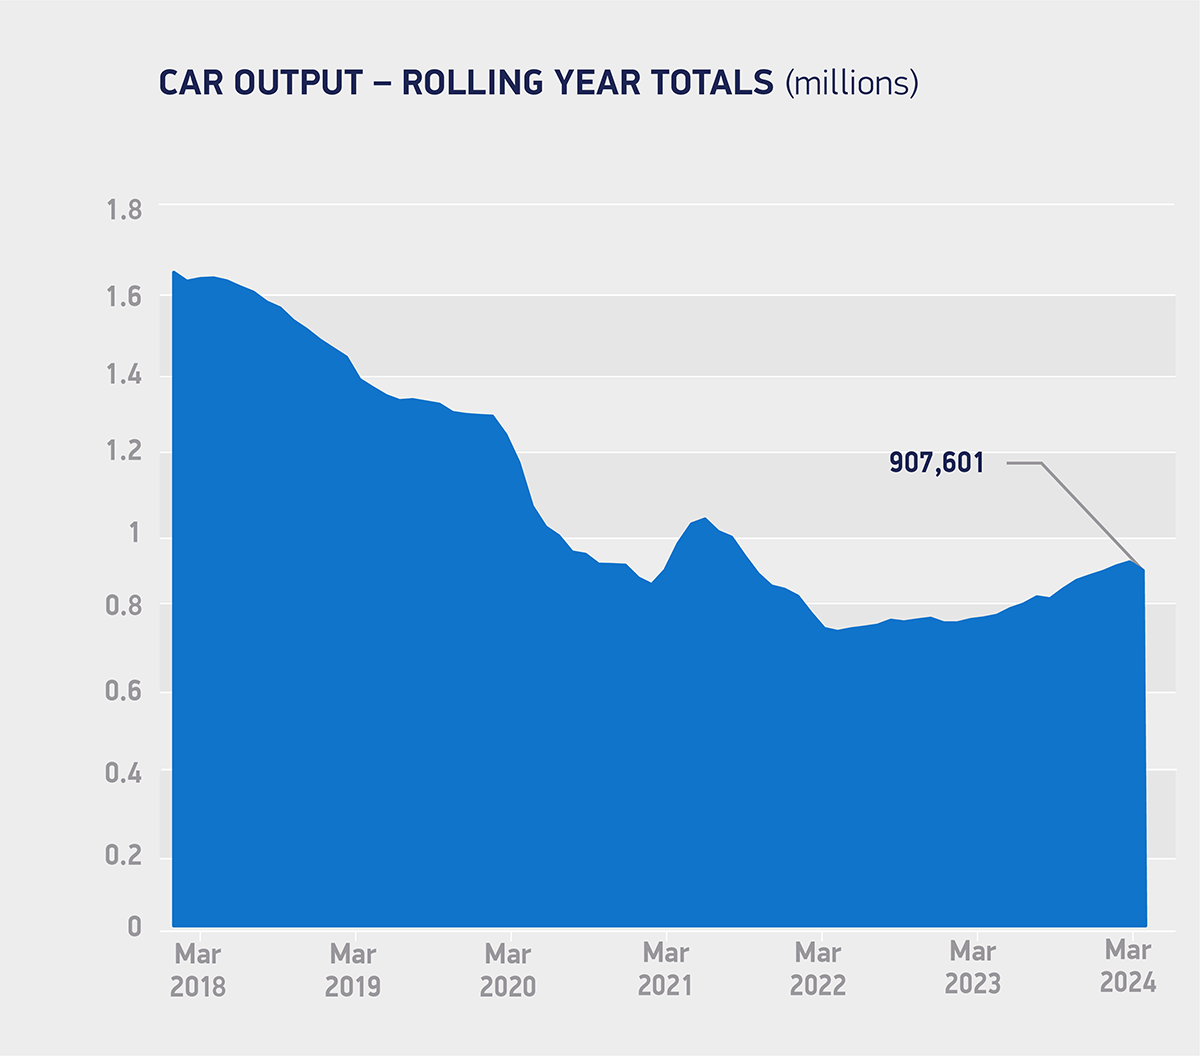 Car output rolling year totals Mar 2024